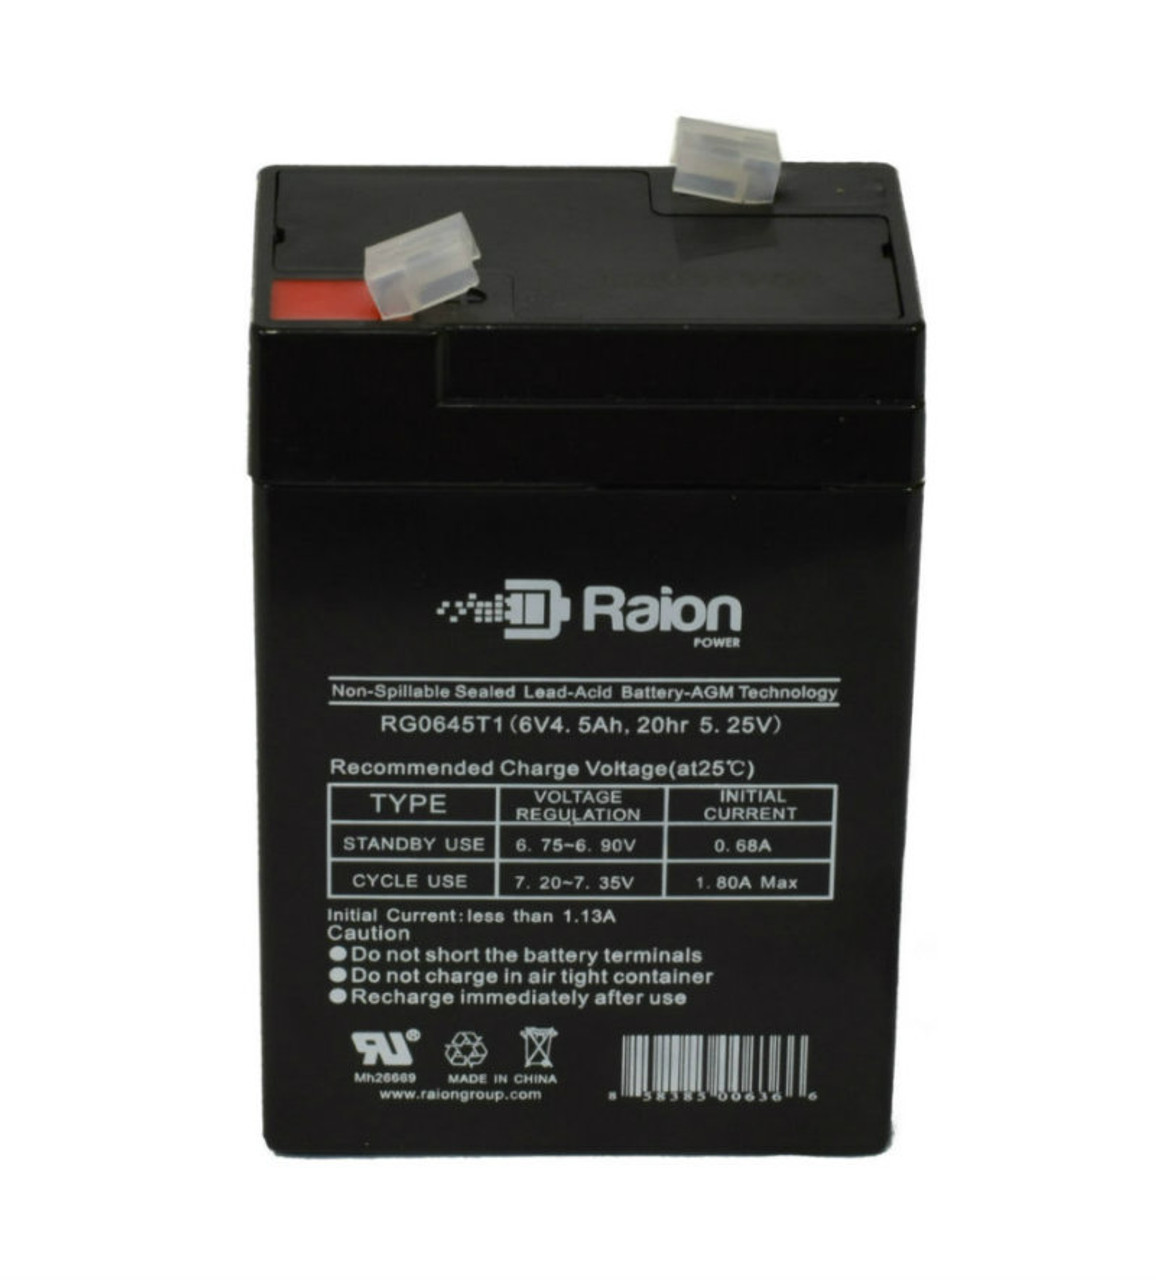 Raion Power RG0645T1 Replacement Battery Cartridge for Teledyne 2CL6S5